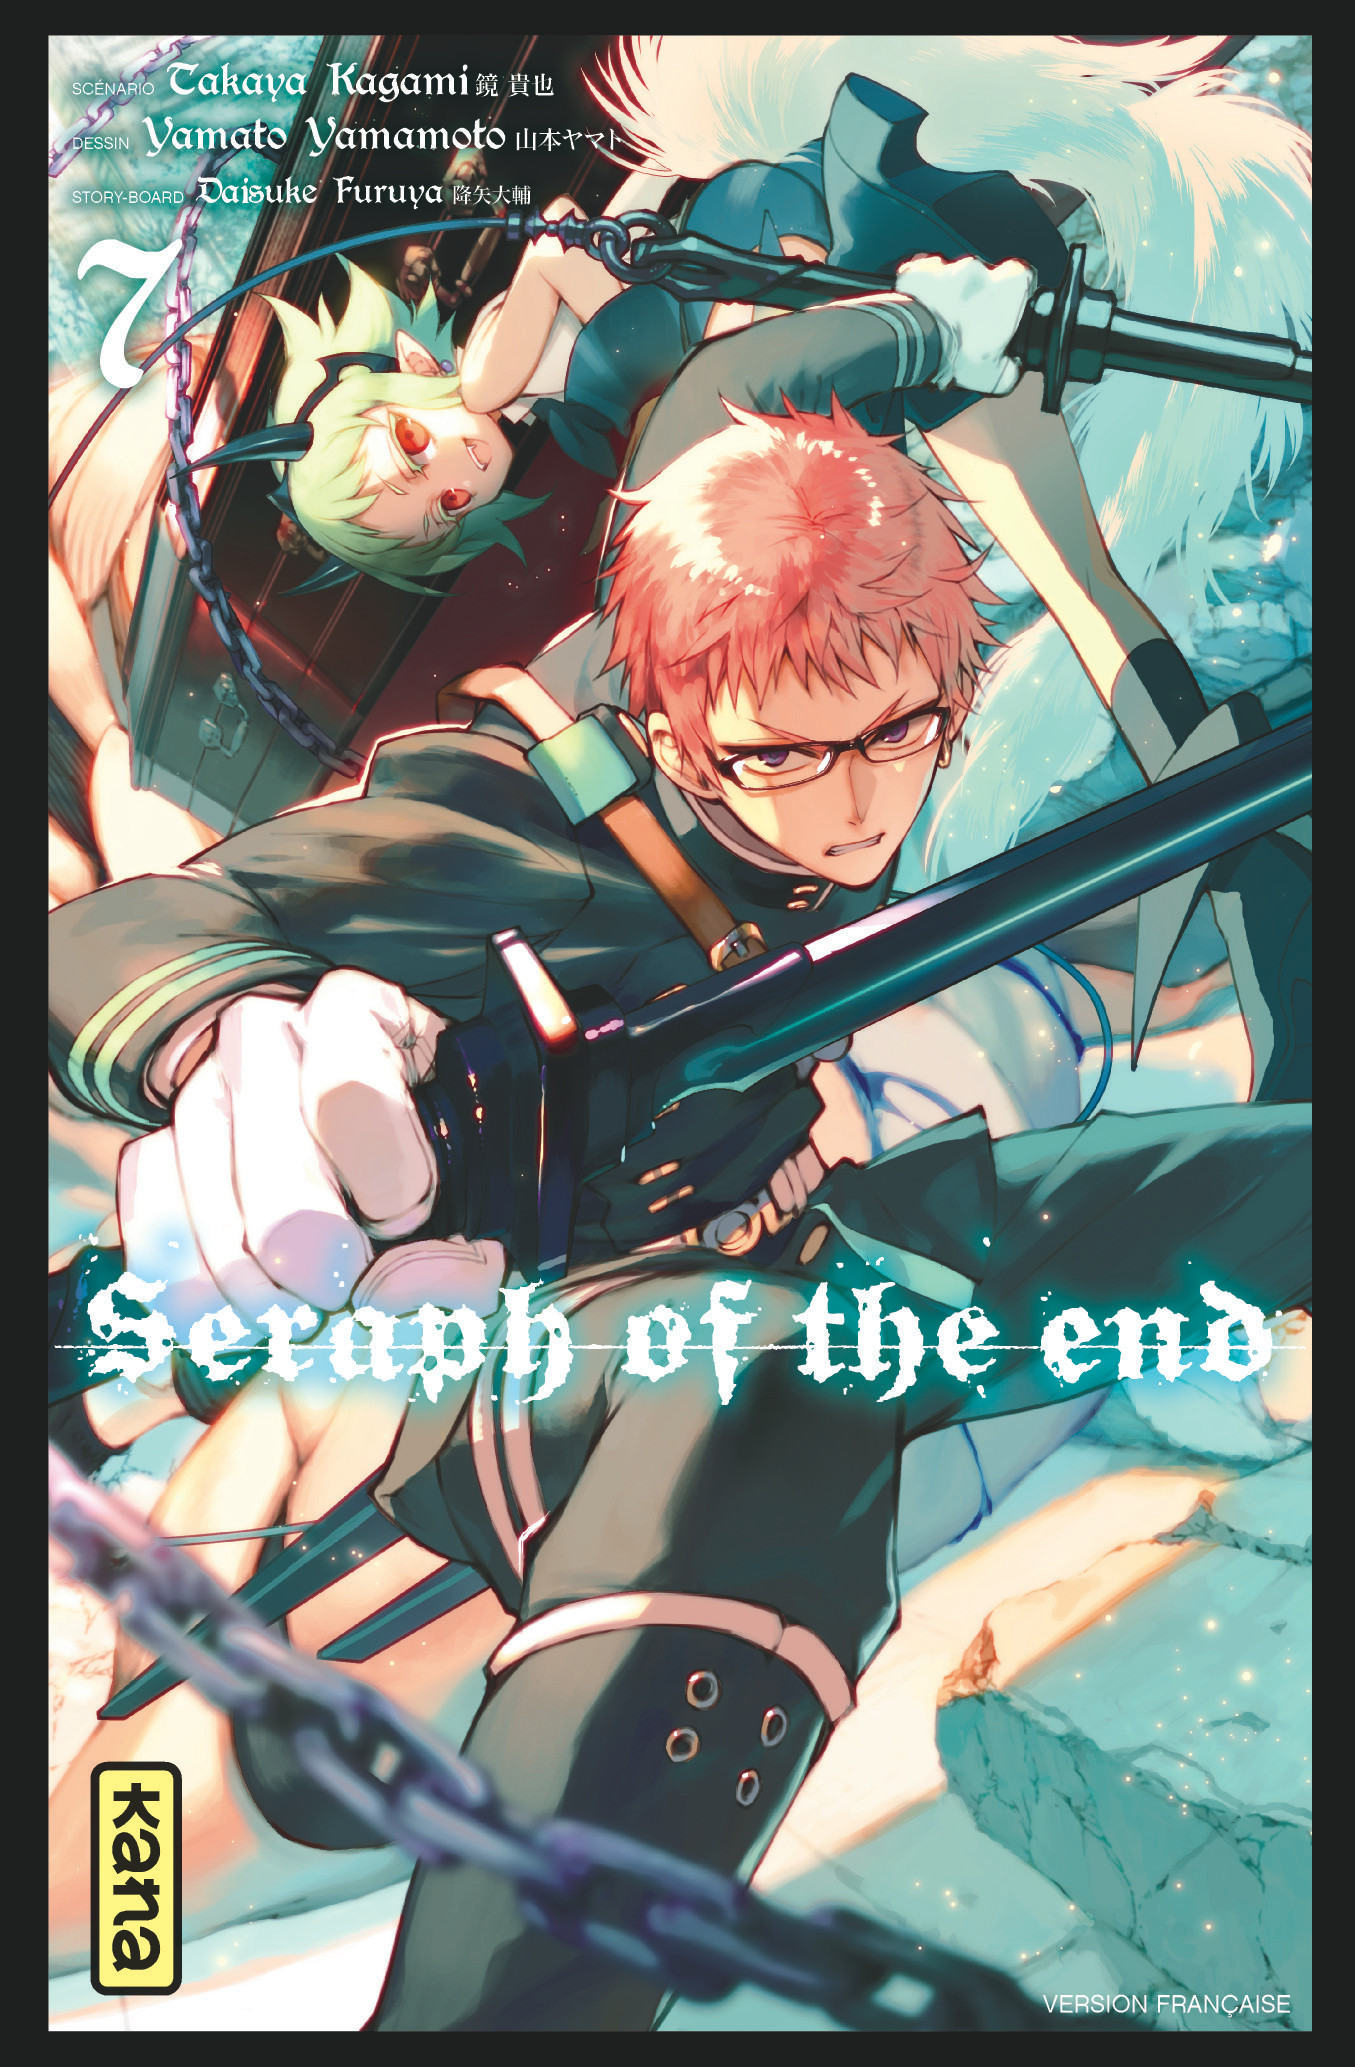 Seraph of the end – Tome 7 - couv